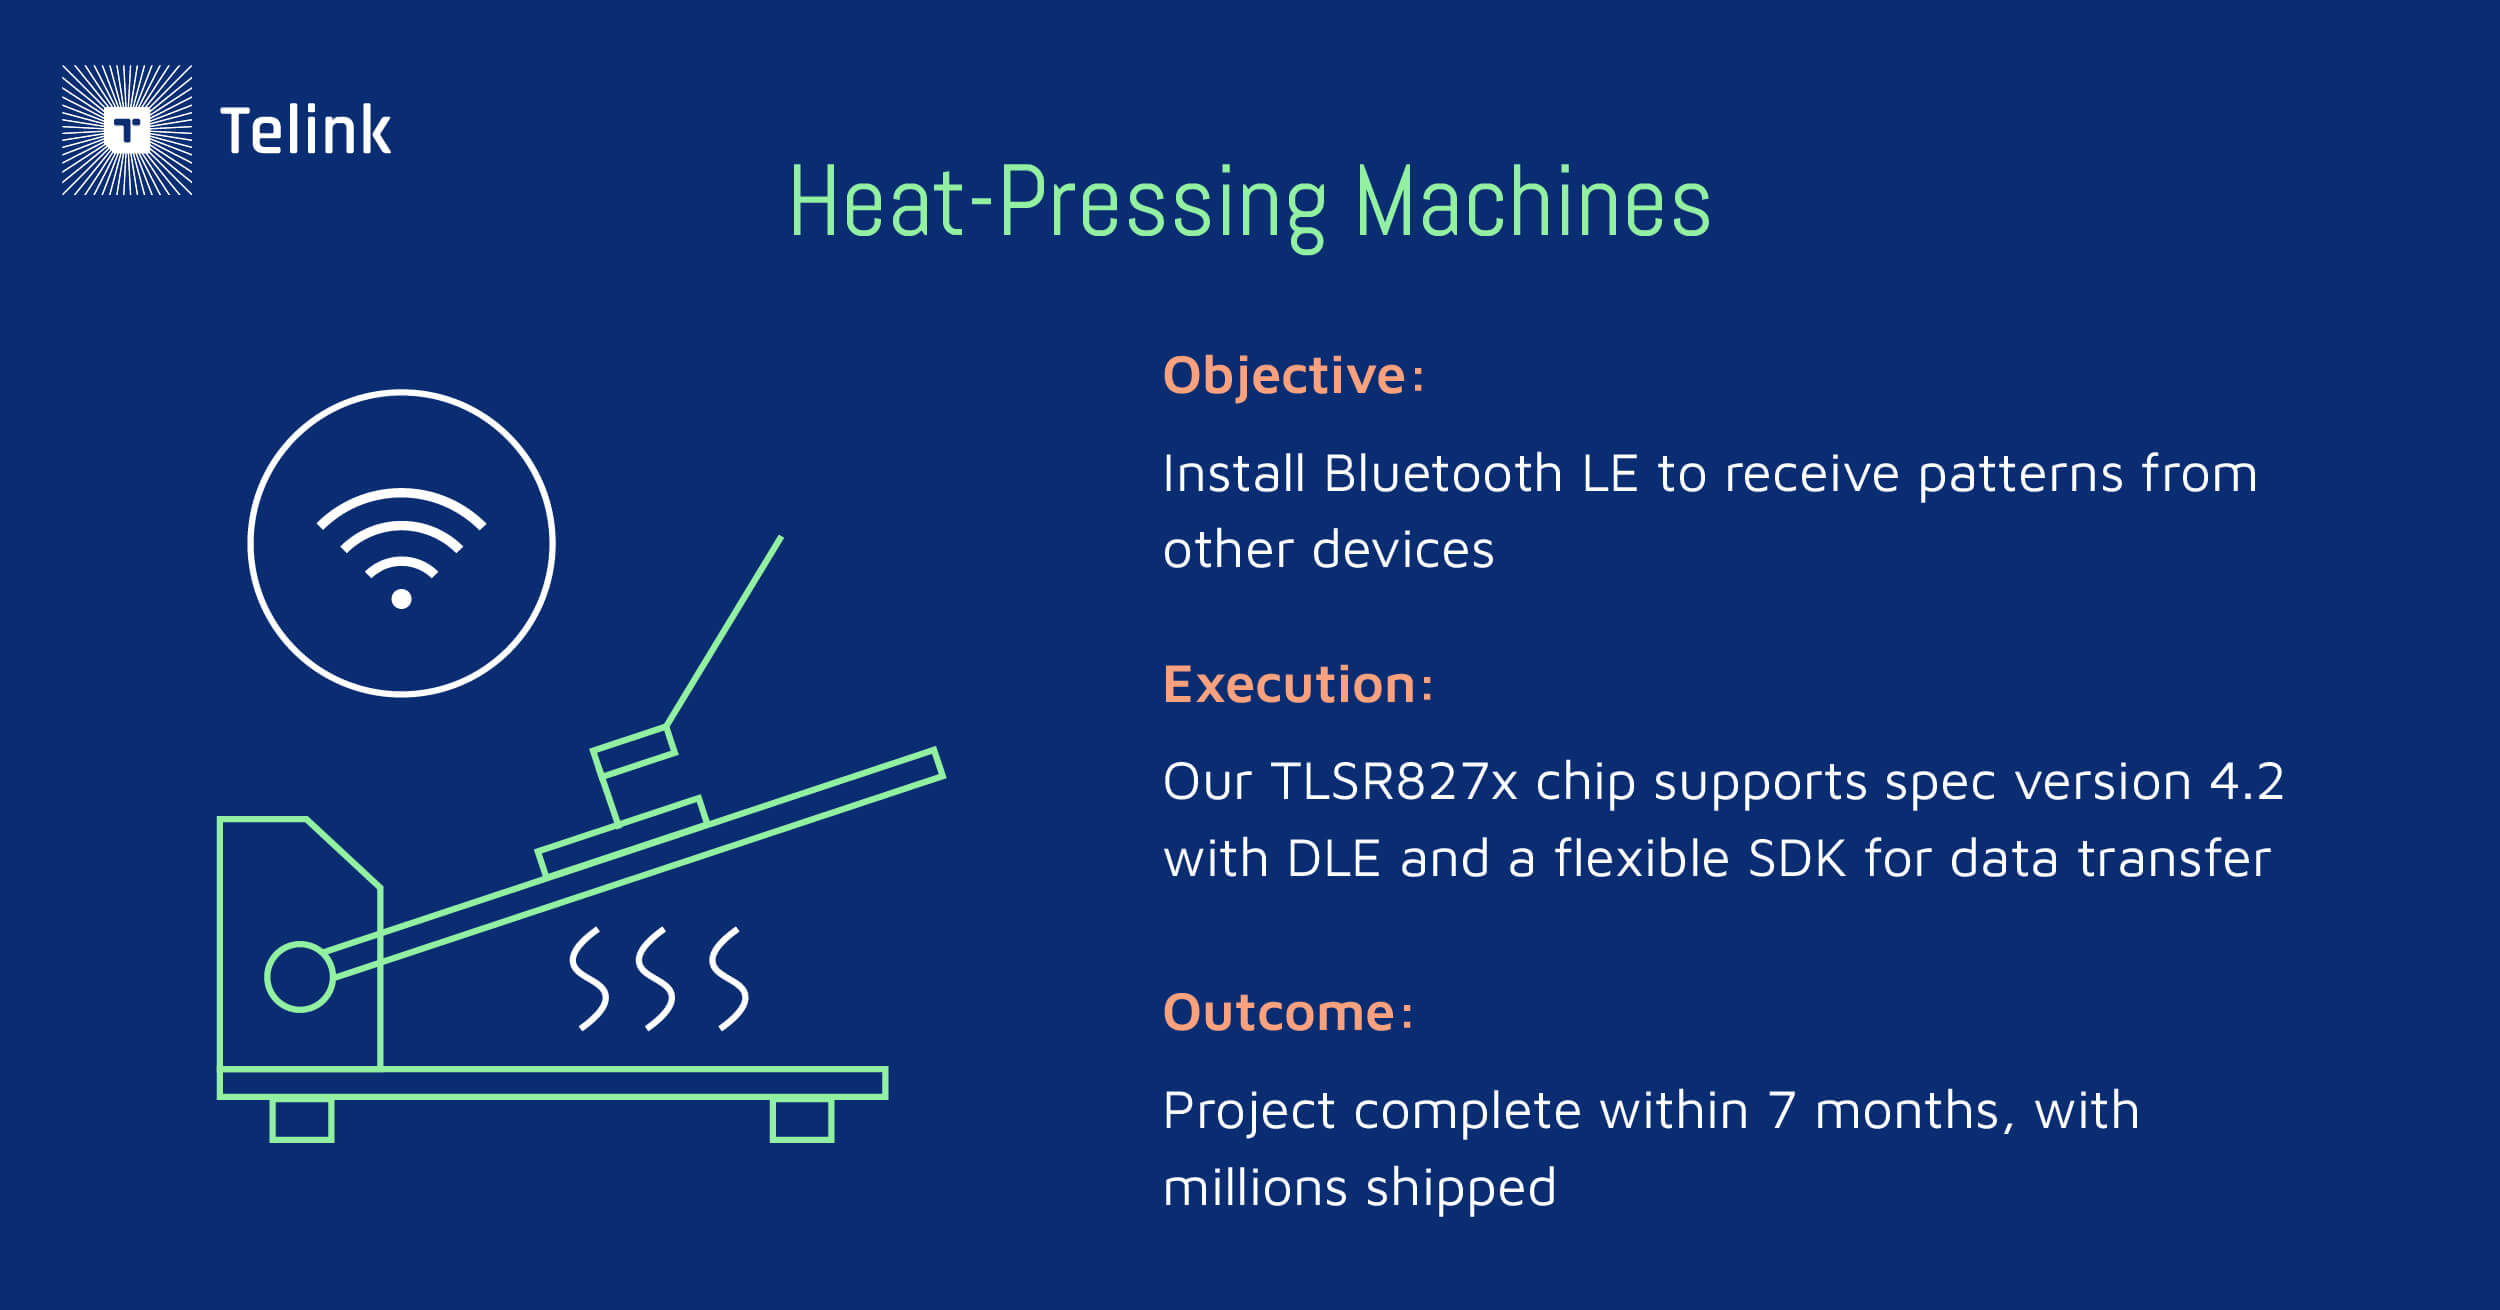 Developing process for heat-pressing machines